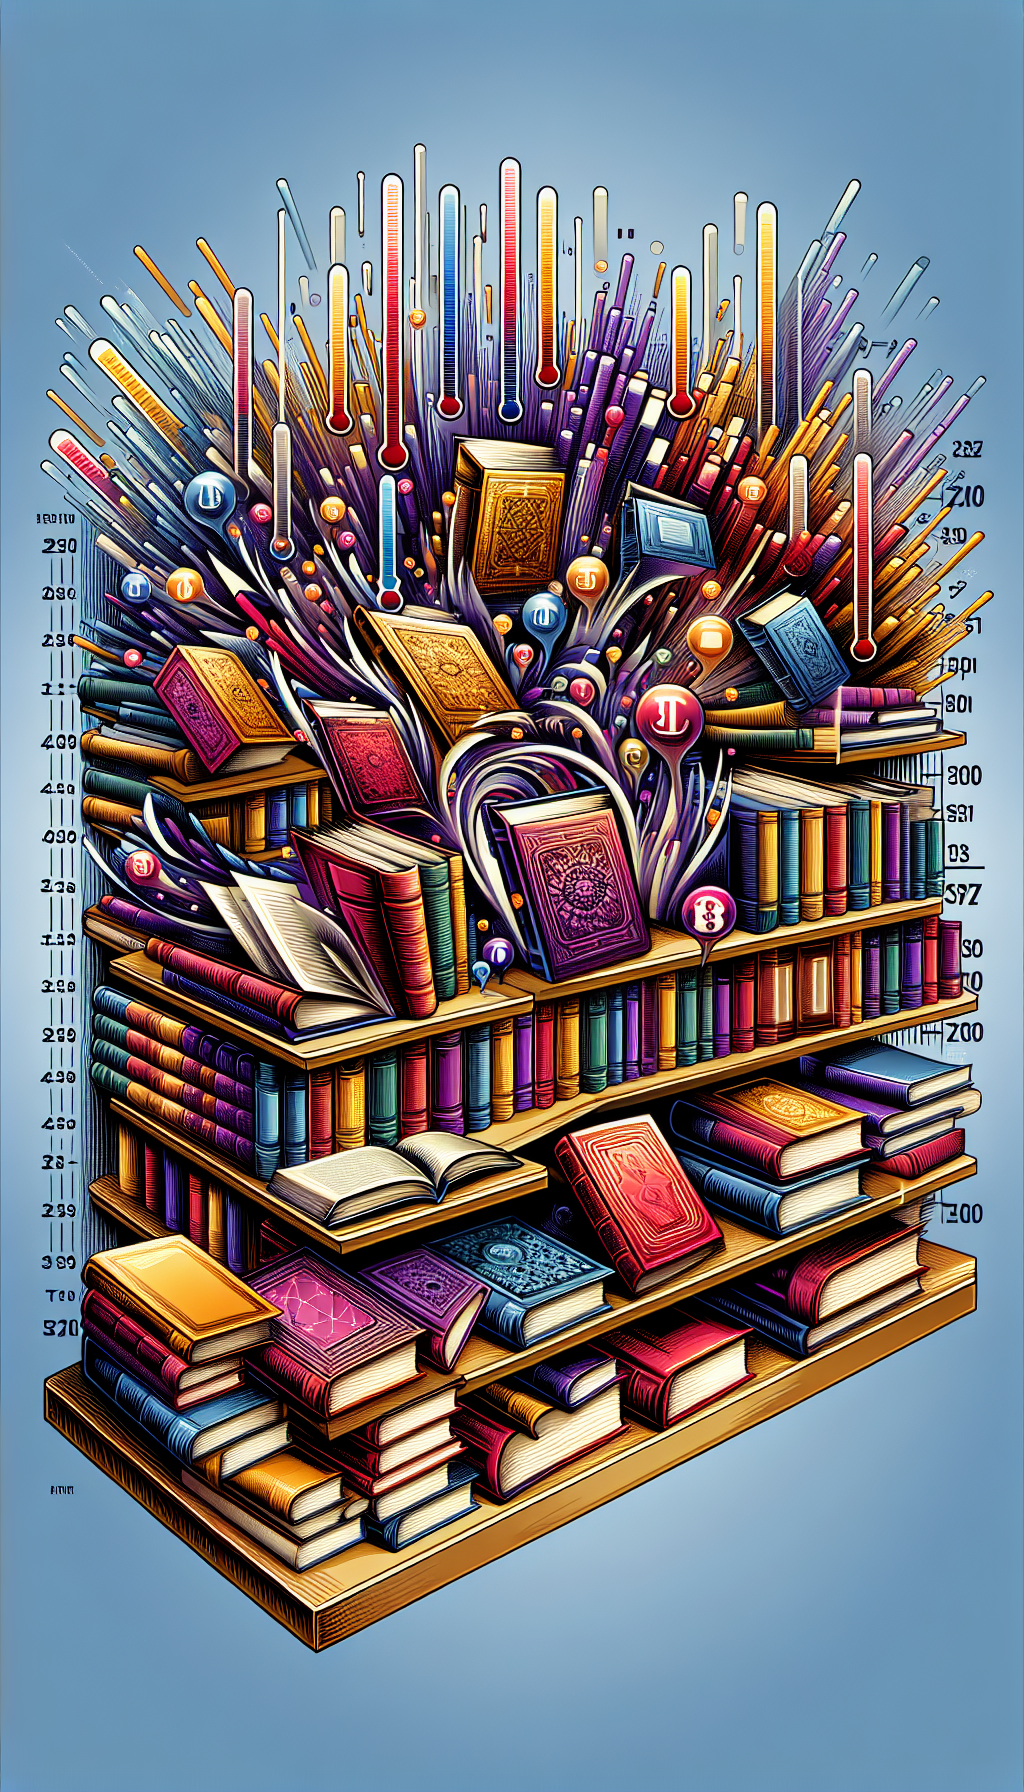 An illustration depicting a vibrant bookshelf, with antique books stacked and adorned with price tags showcasing rising values, alongside a thermometer graphic that weaves through the shelf indicating 'hot' trends in genres, such as classic literature or vintage sci-fi. The styles of the books range from realistic to abstract, with occasional gilded edges shimmering to imply their worth.